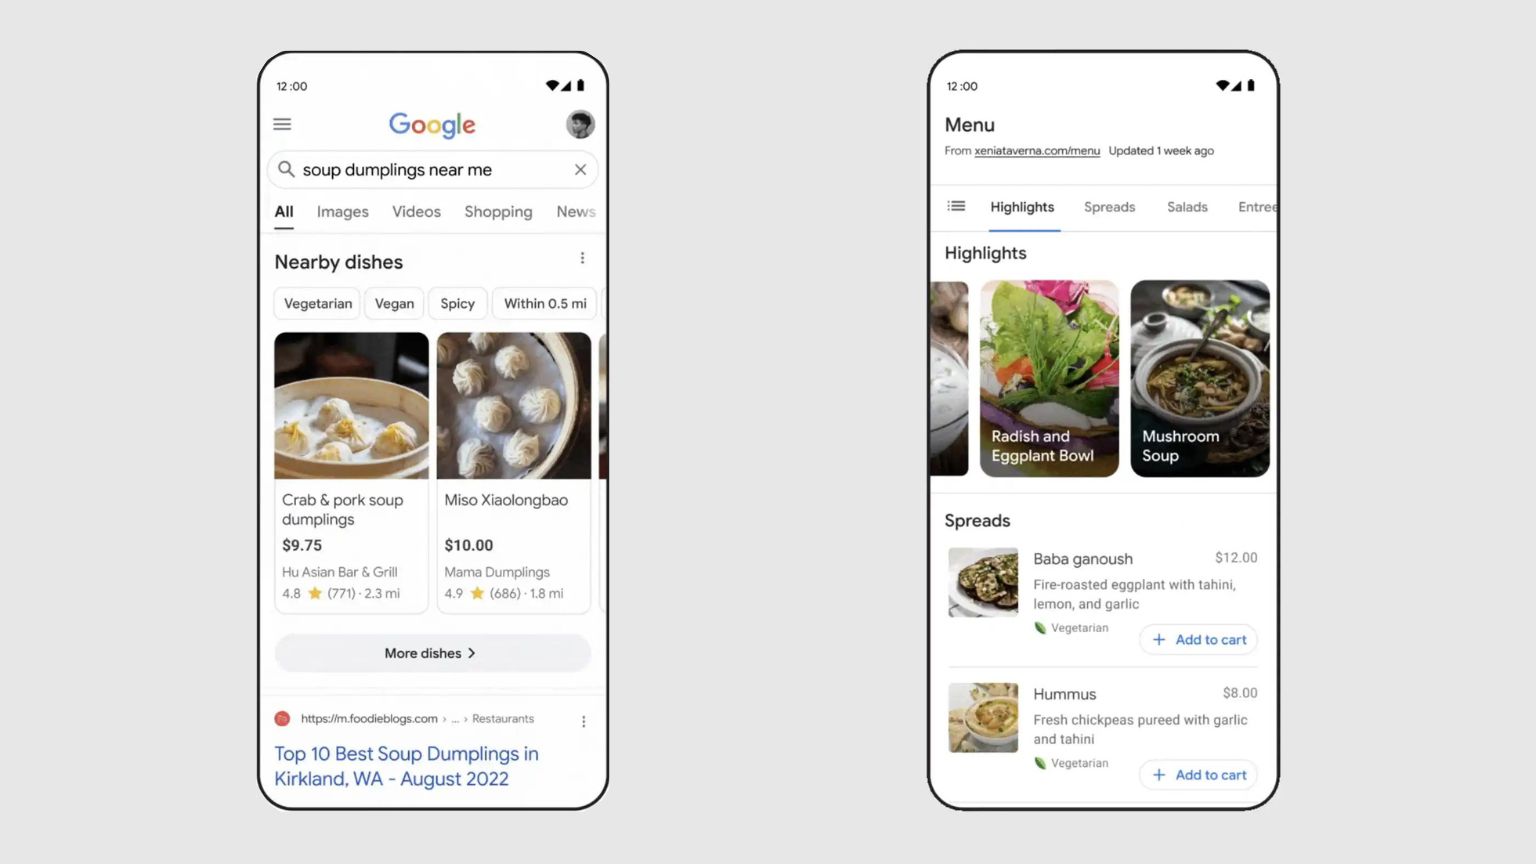 Search Dishes in Nearby Restaurants